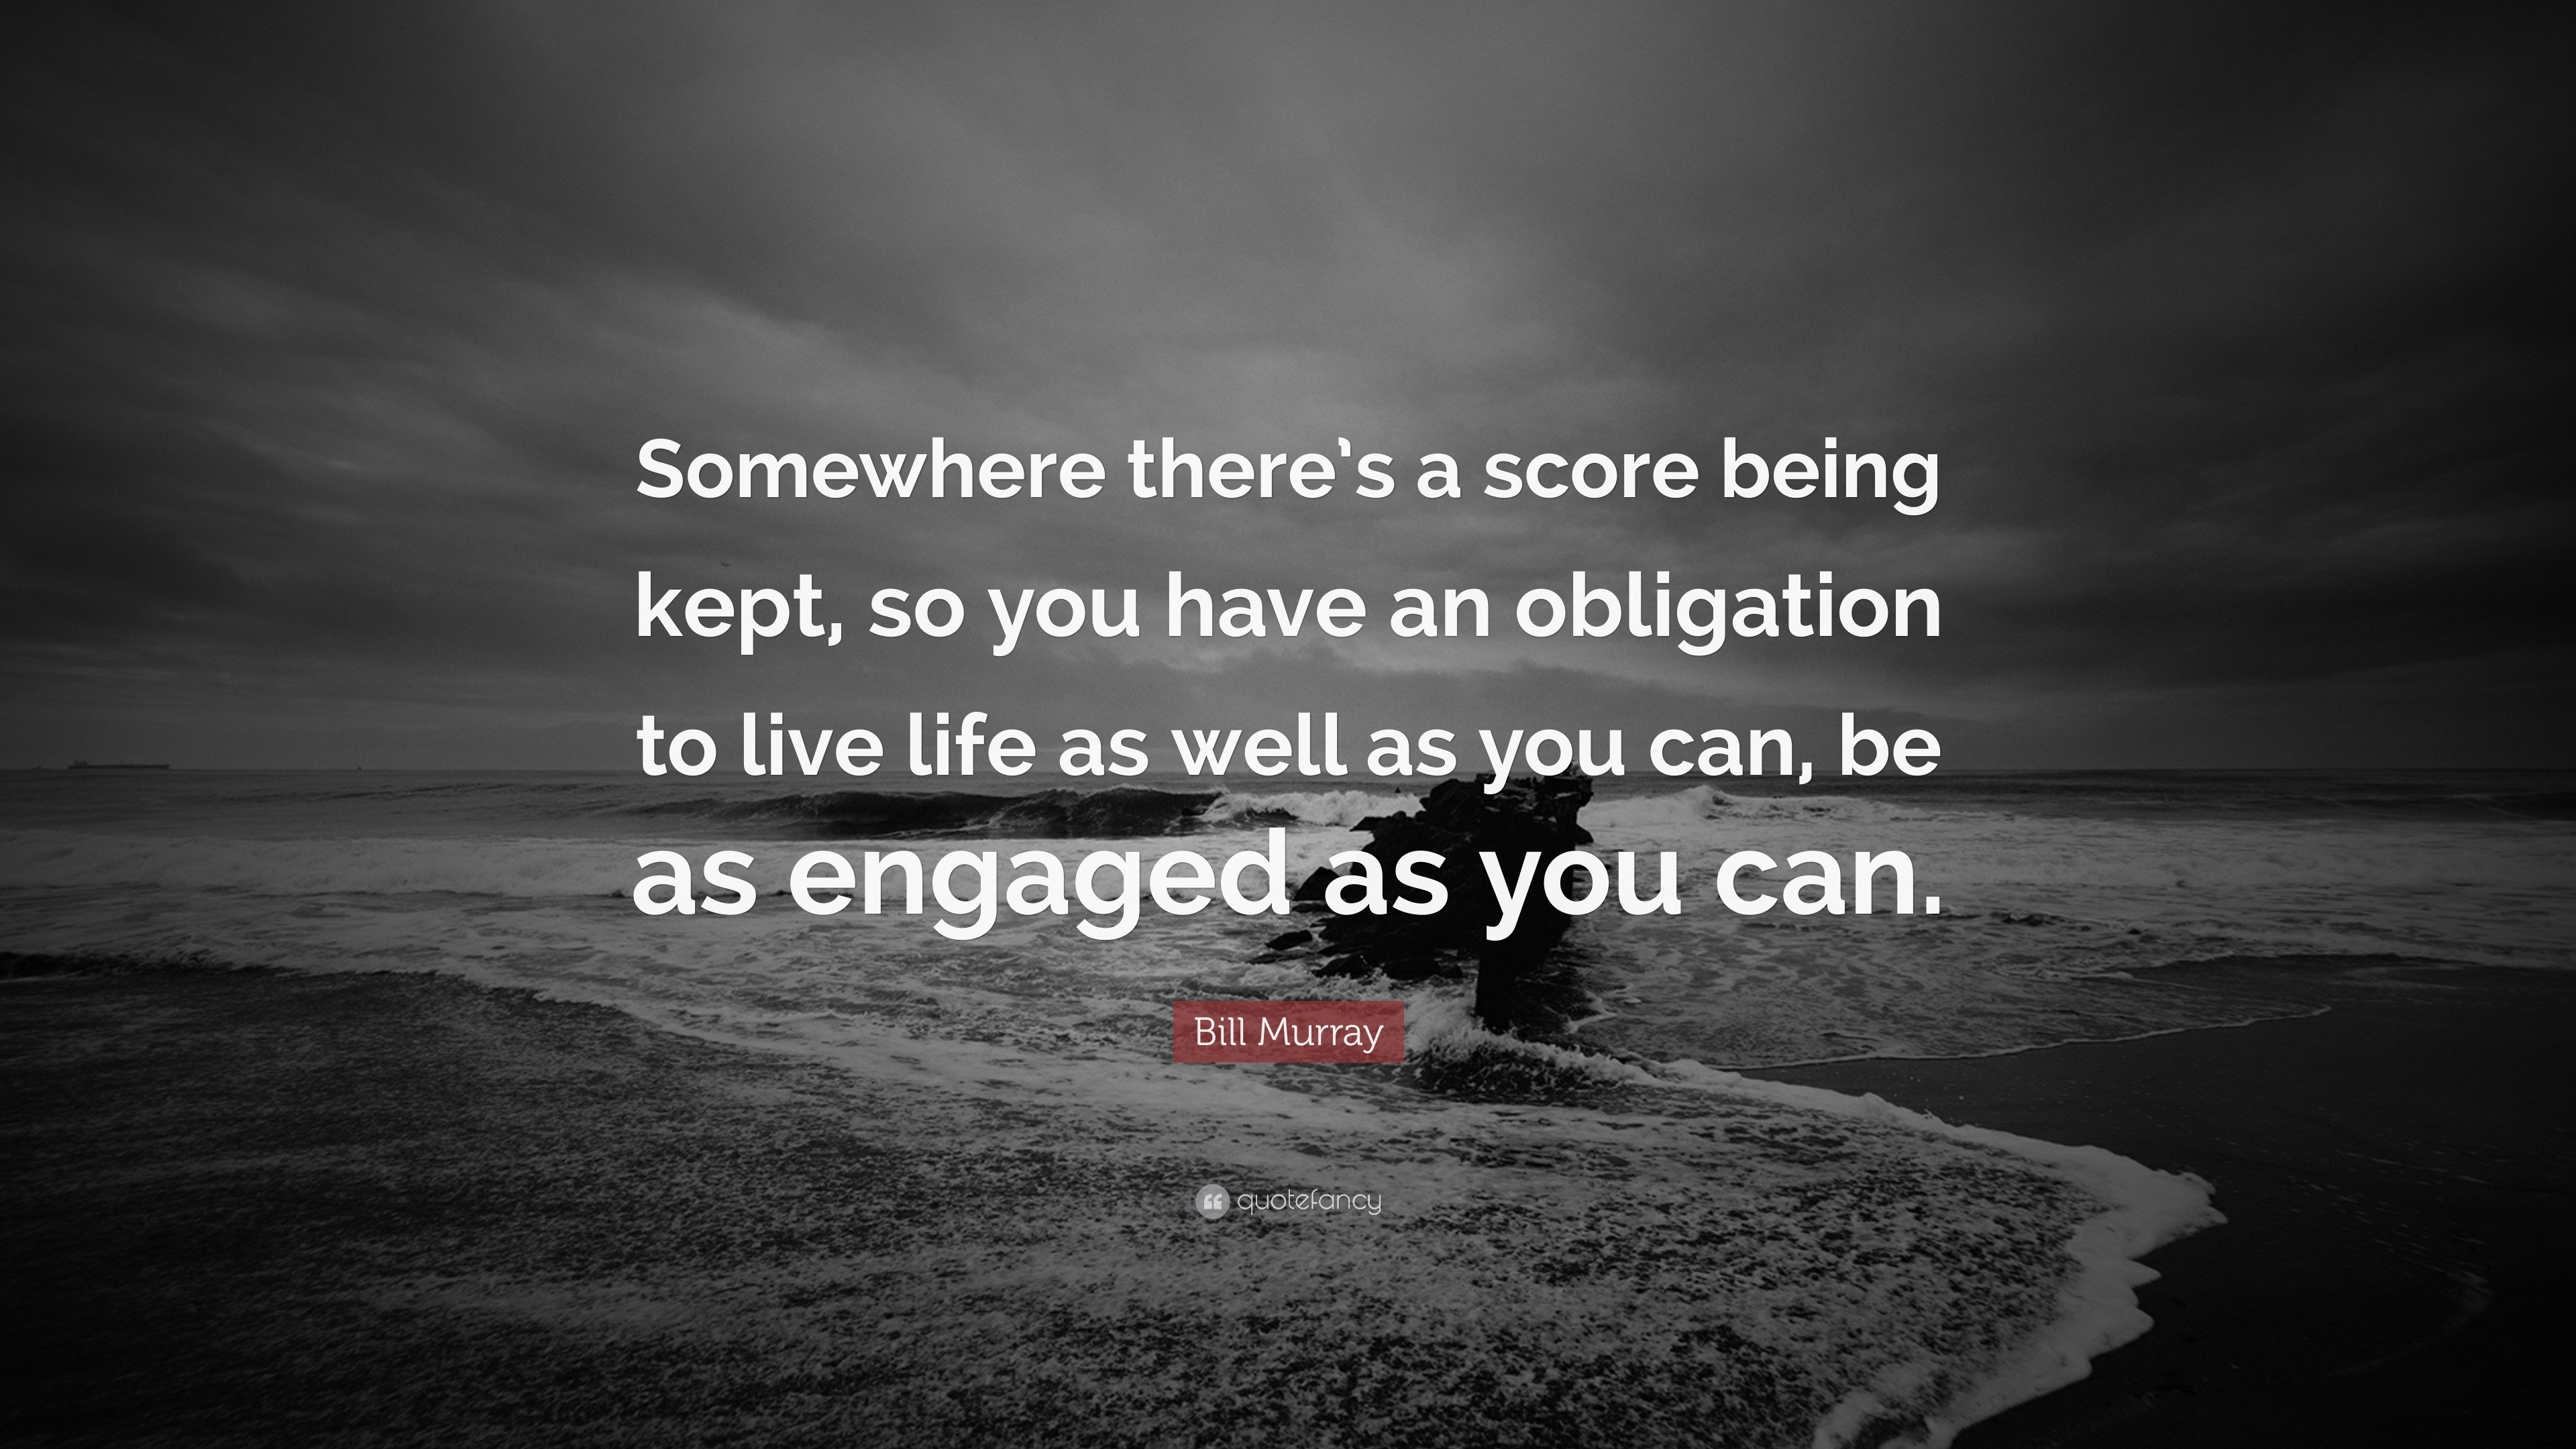 Bill Murray Quote “Somewhere theres a score being kept, so you have an obligation to live life as well as you can, be as engaged as you ca...”